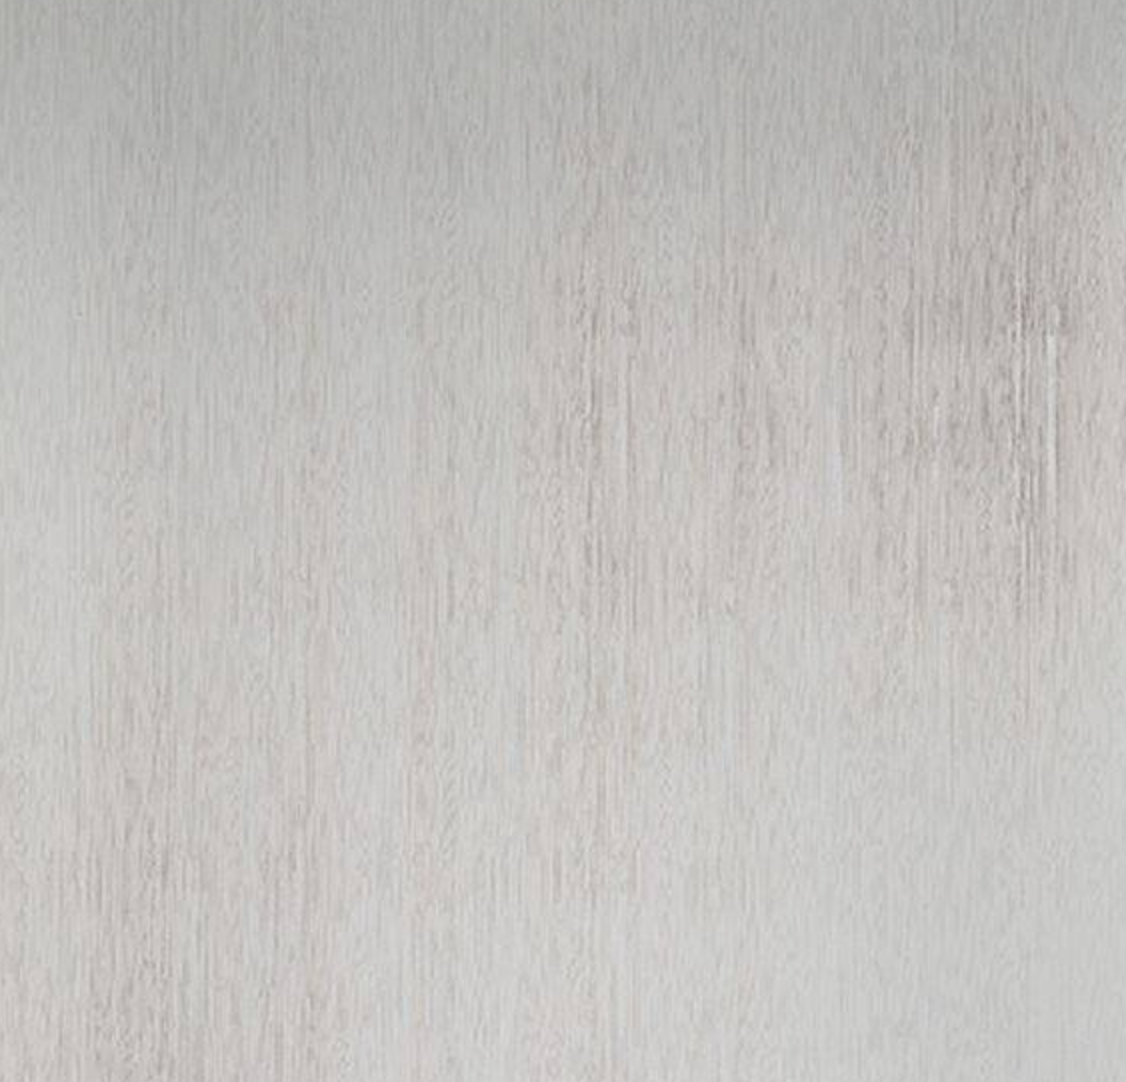 Showerwall Laminate Quarry Collection - Linea White